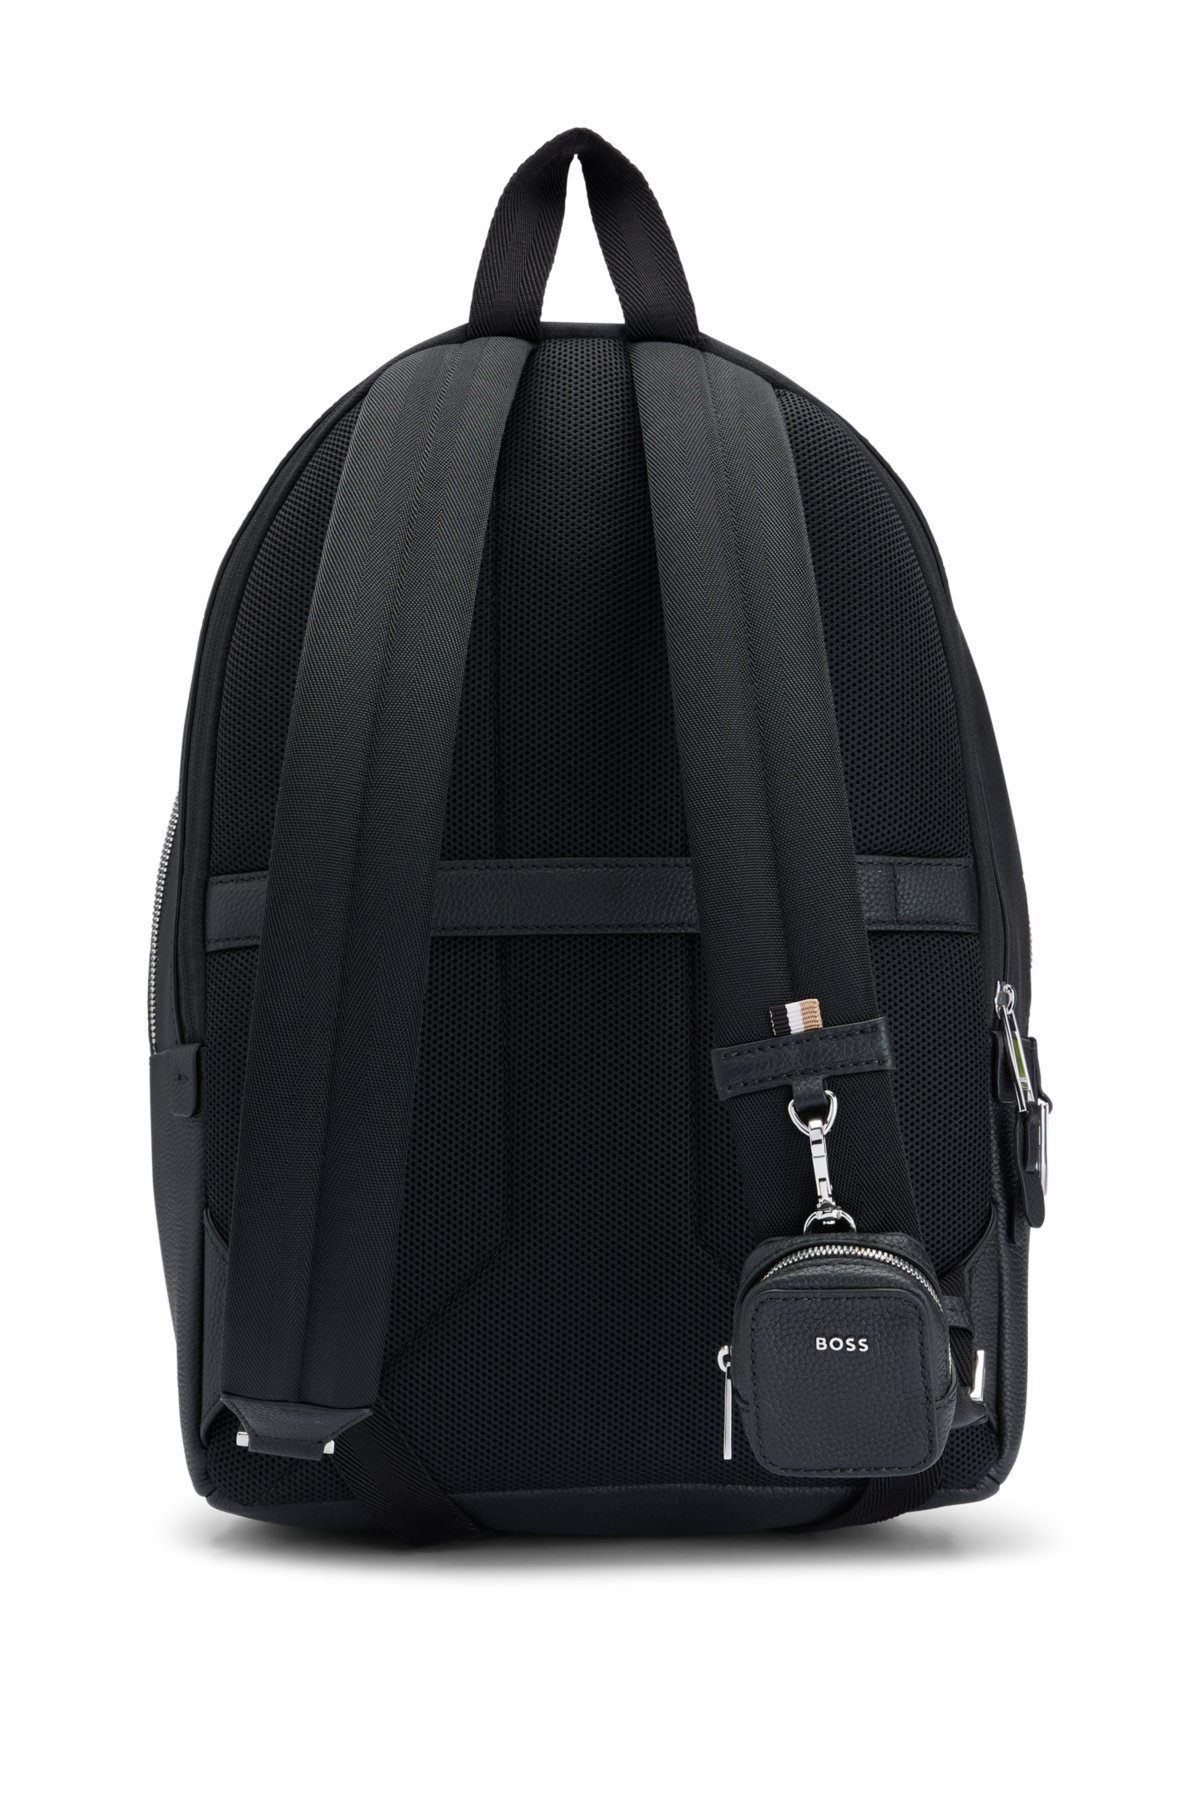 BOSS - Grained-leather backpack with polished silver hardware